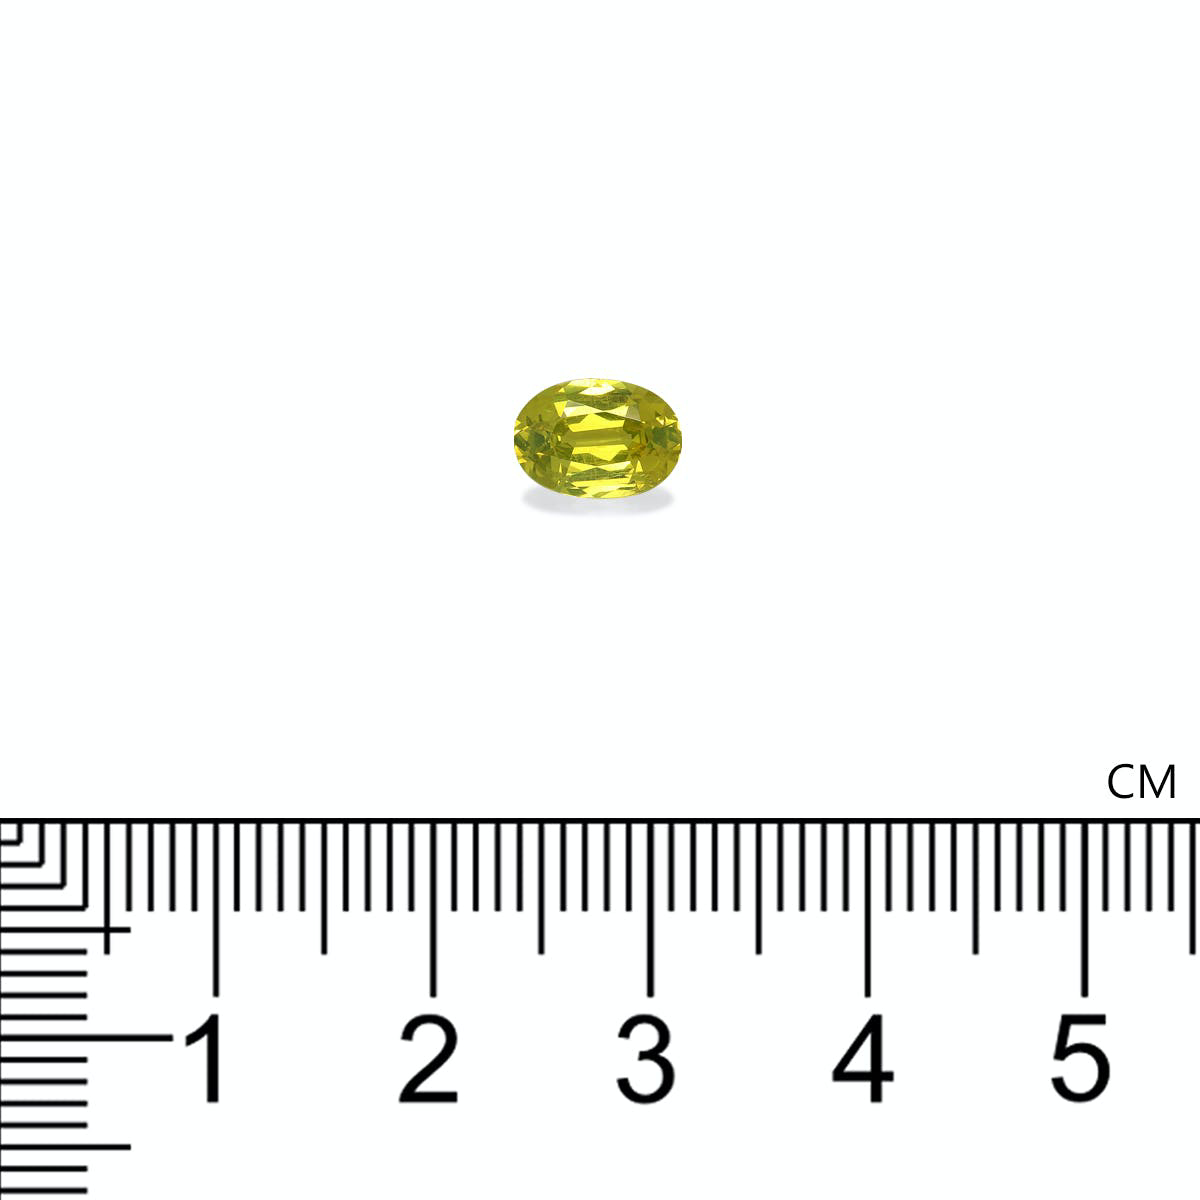 Picture of Golden Yellow Chrysoberyl 1.24ct (CB0159)